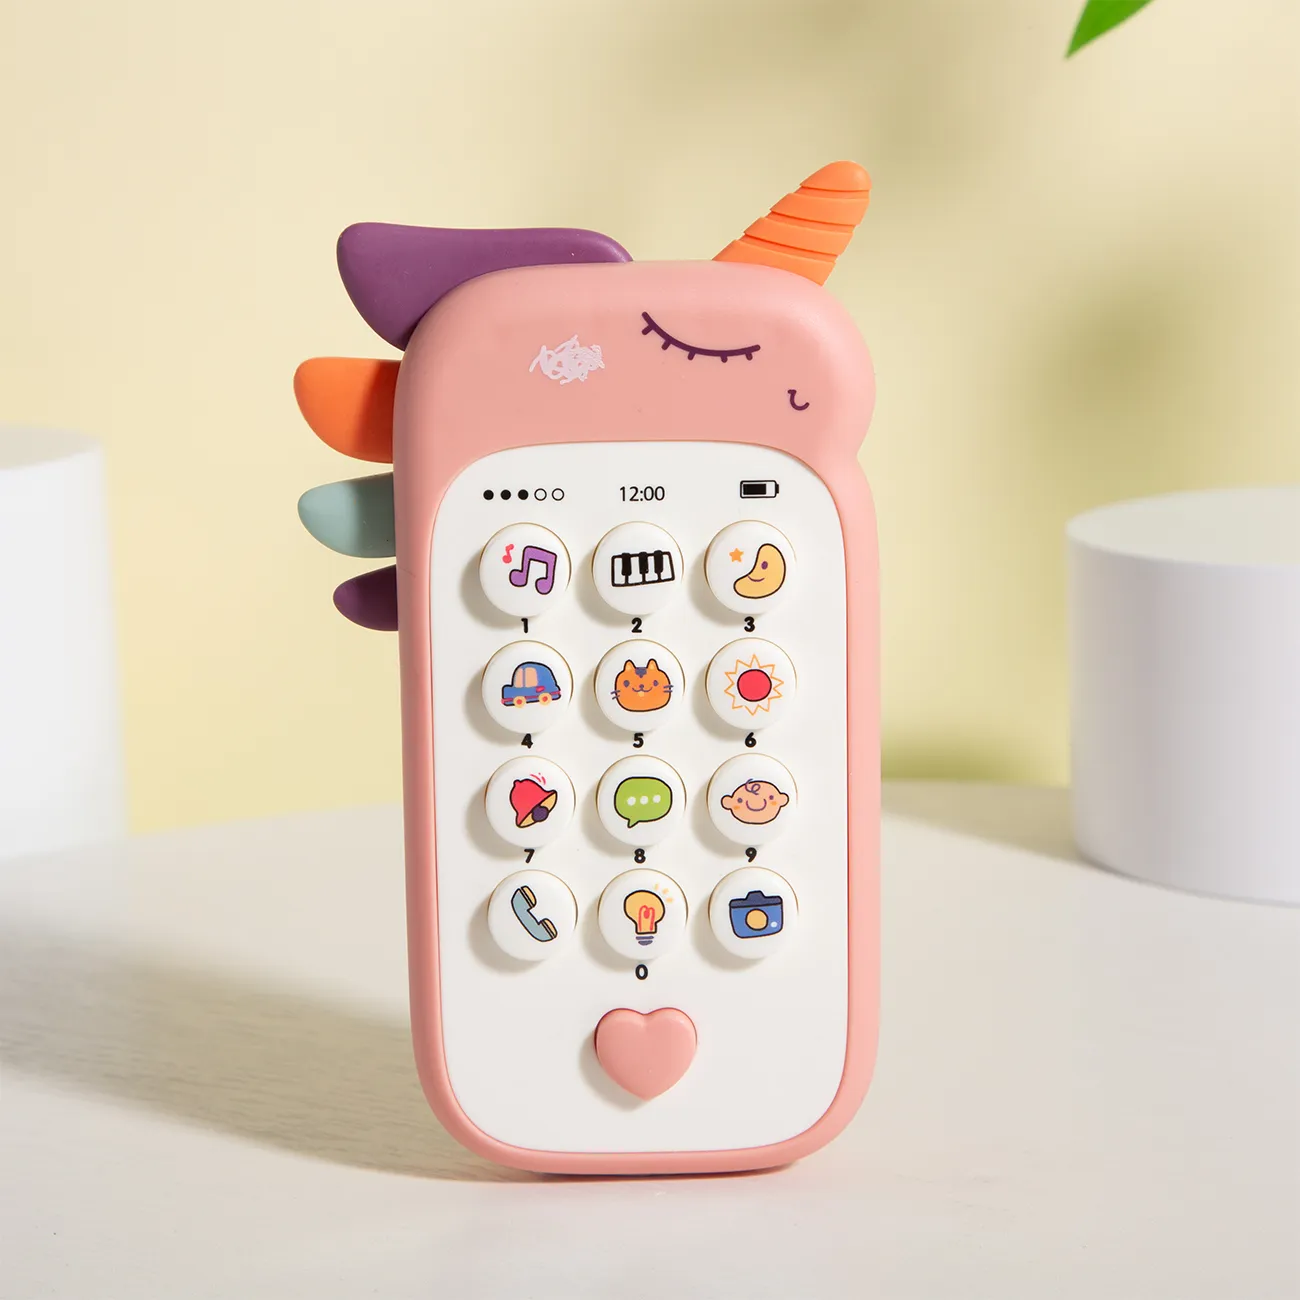 Baby Mobile Phone Toy Learning Interactive Educational Cell Phone Toy Early Education Smartphone Toy with a Variety of Music Sounds Pink big image 1